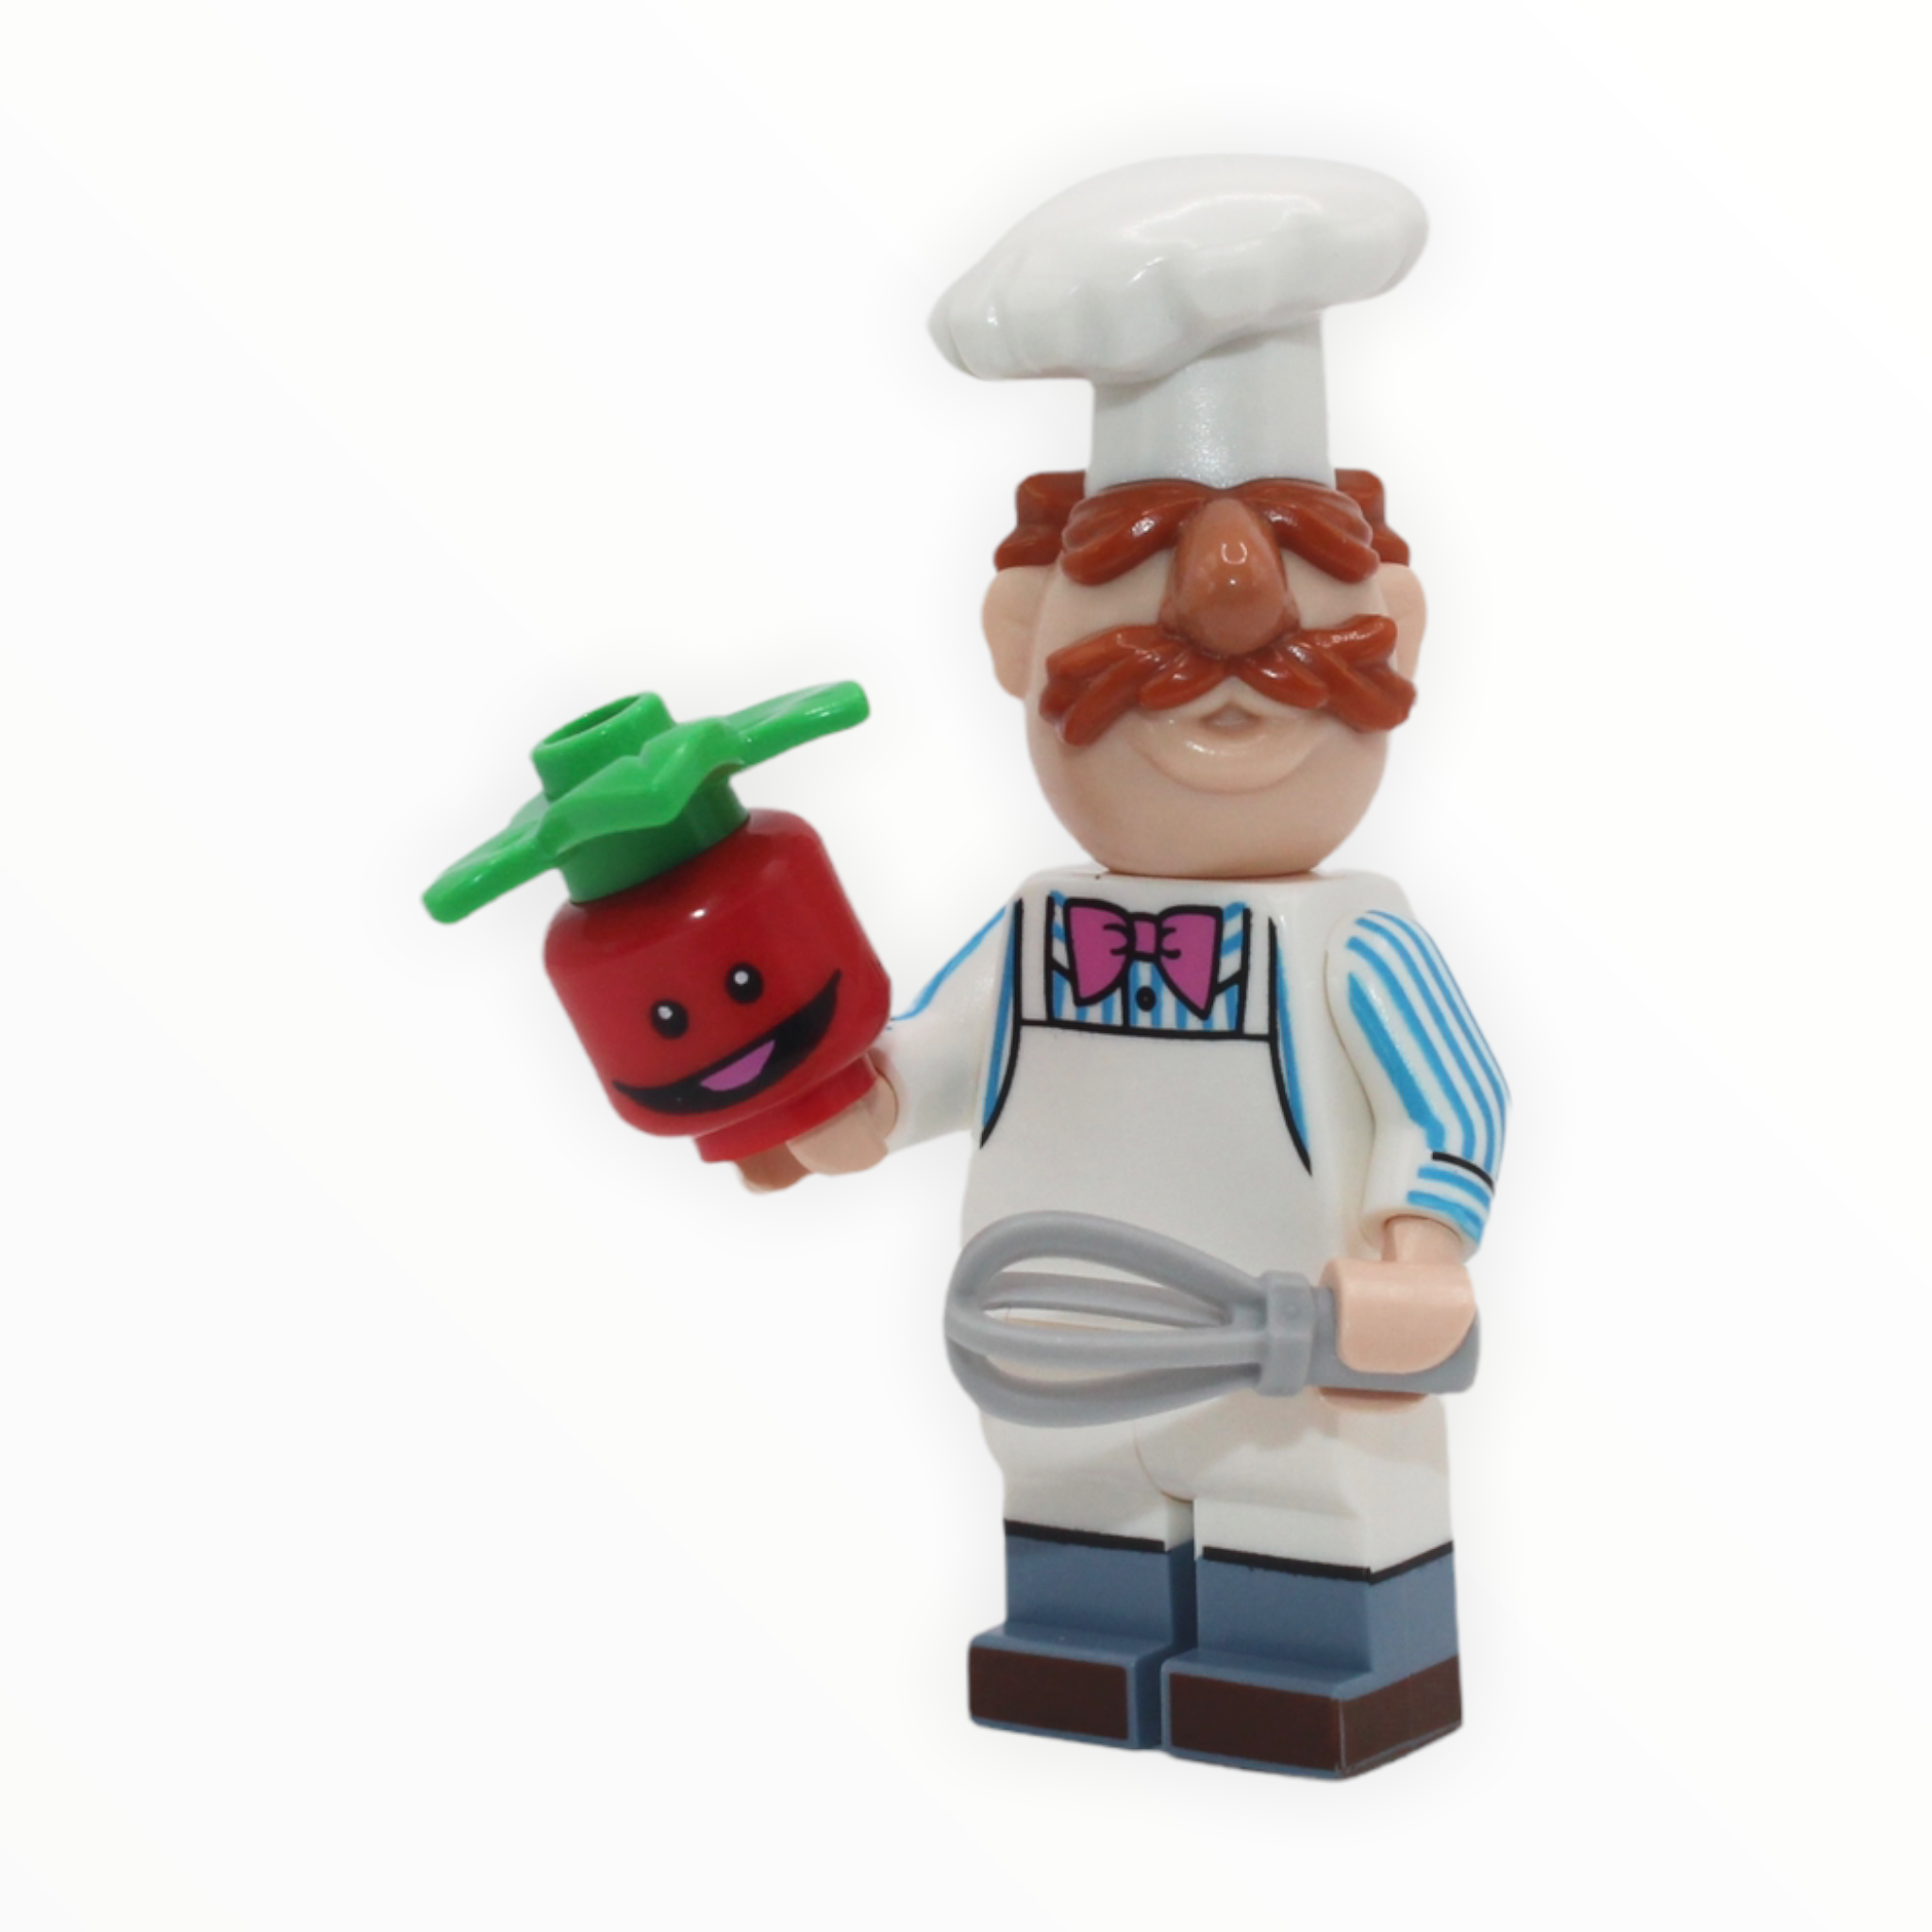 The Muppets Series: The Swedish Chef